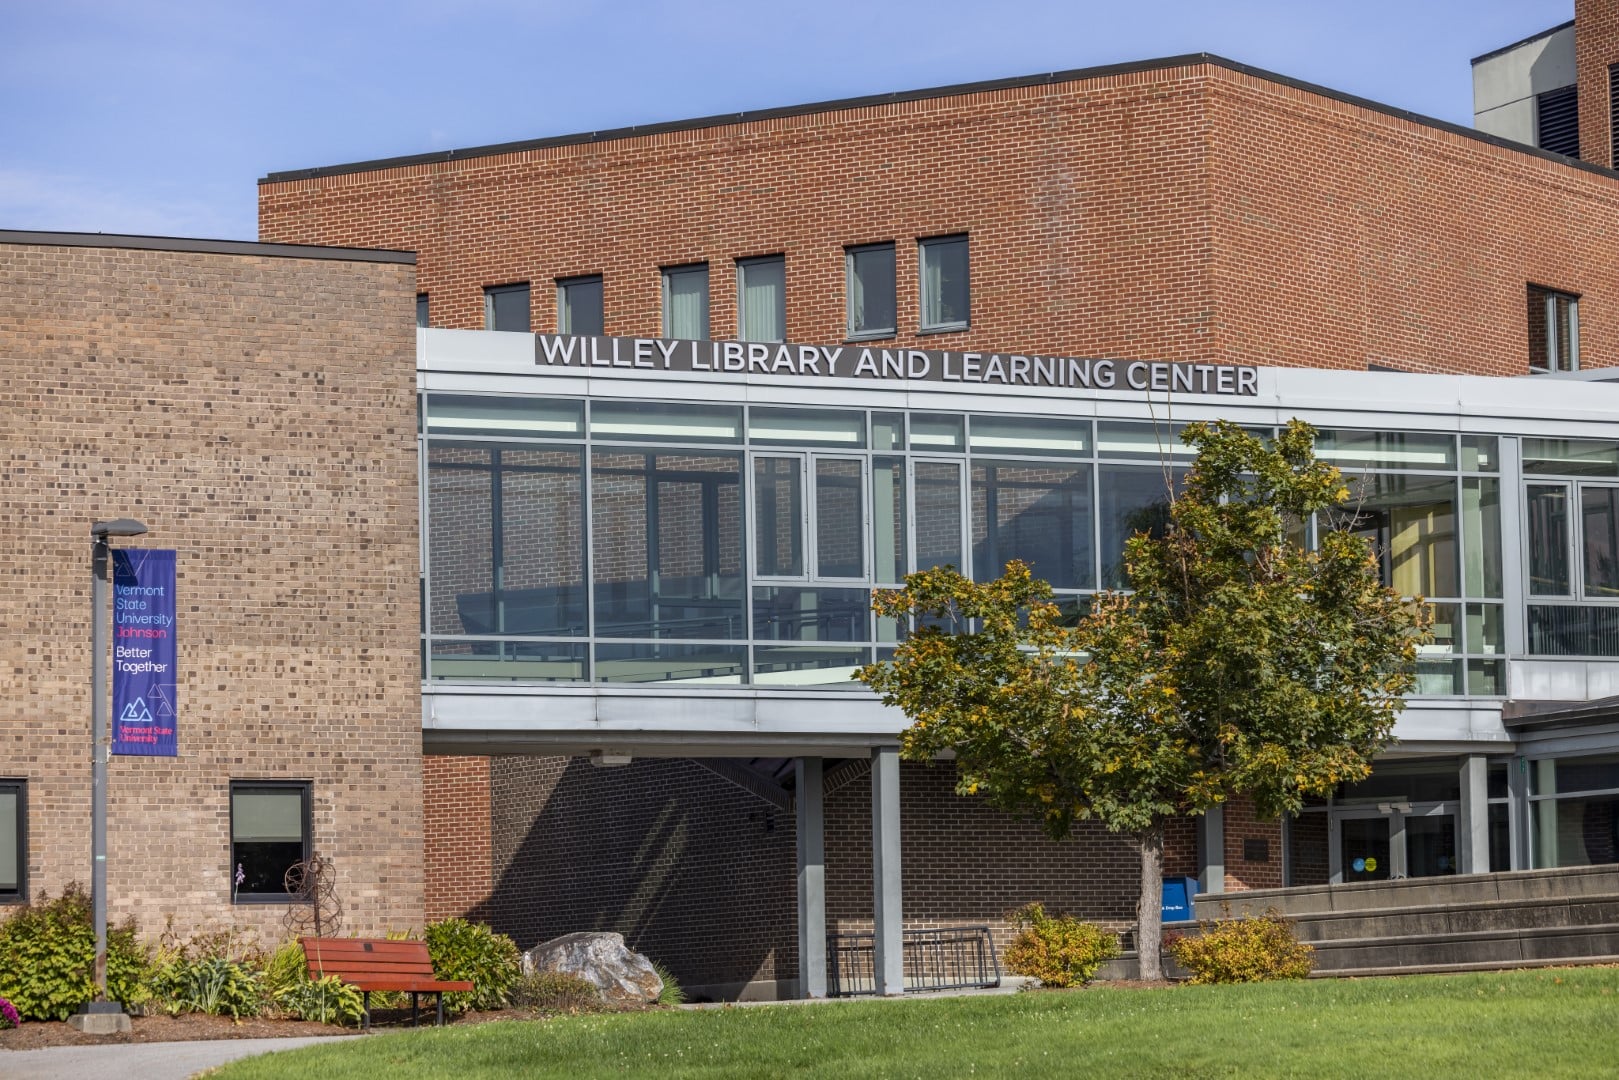 A brick building with a glass catwalk that says Willey Library and Learning Center.